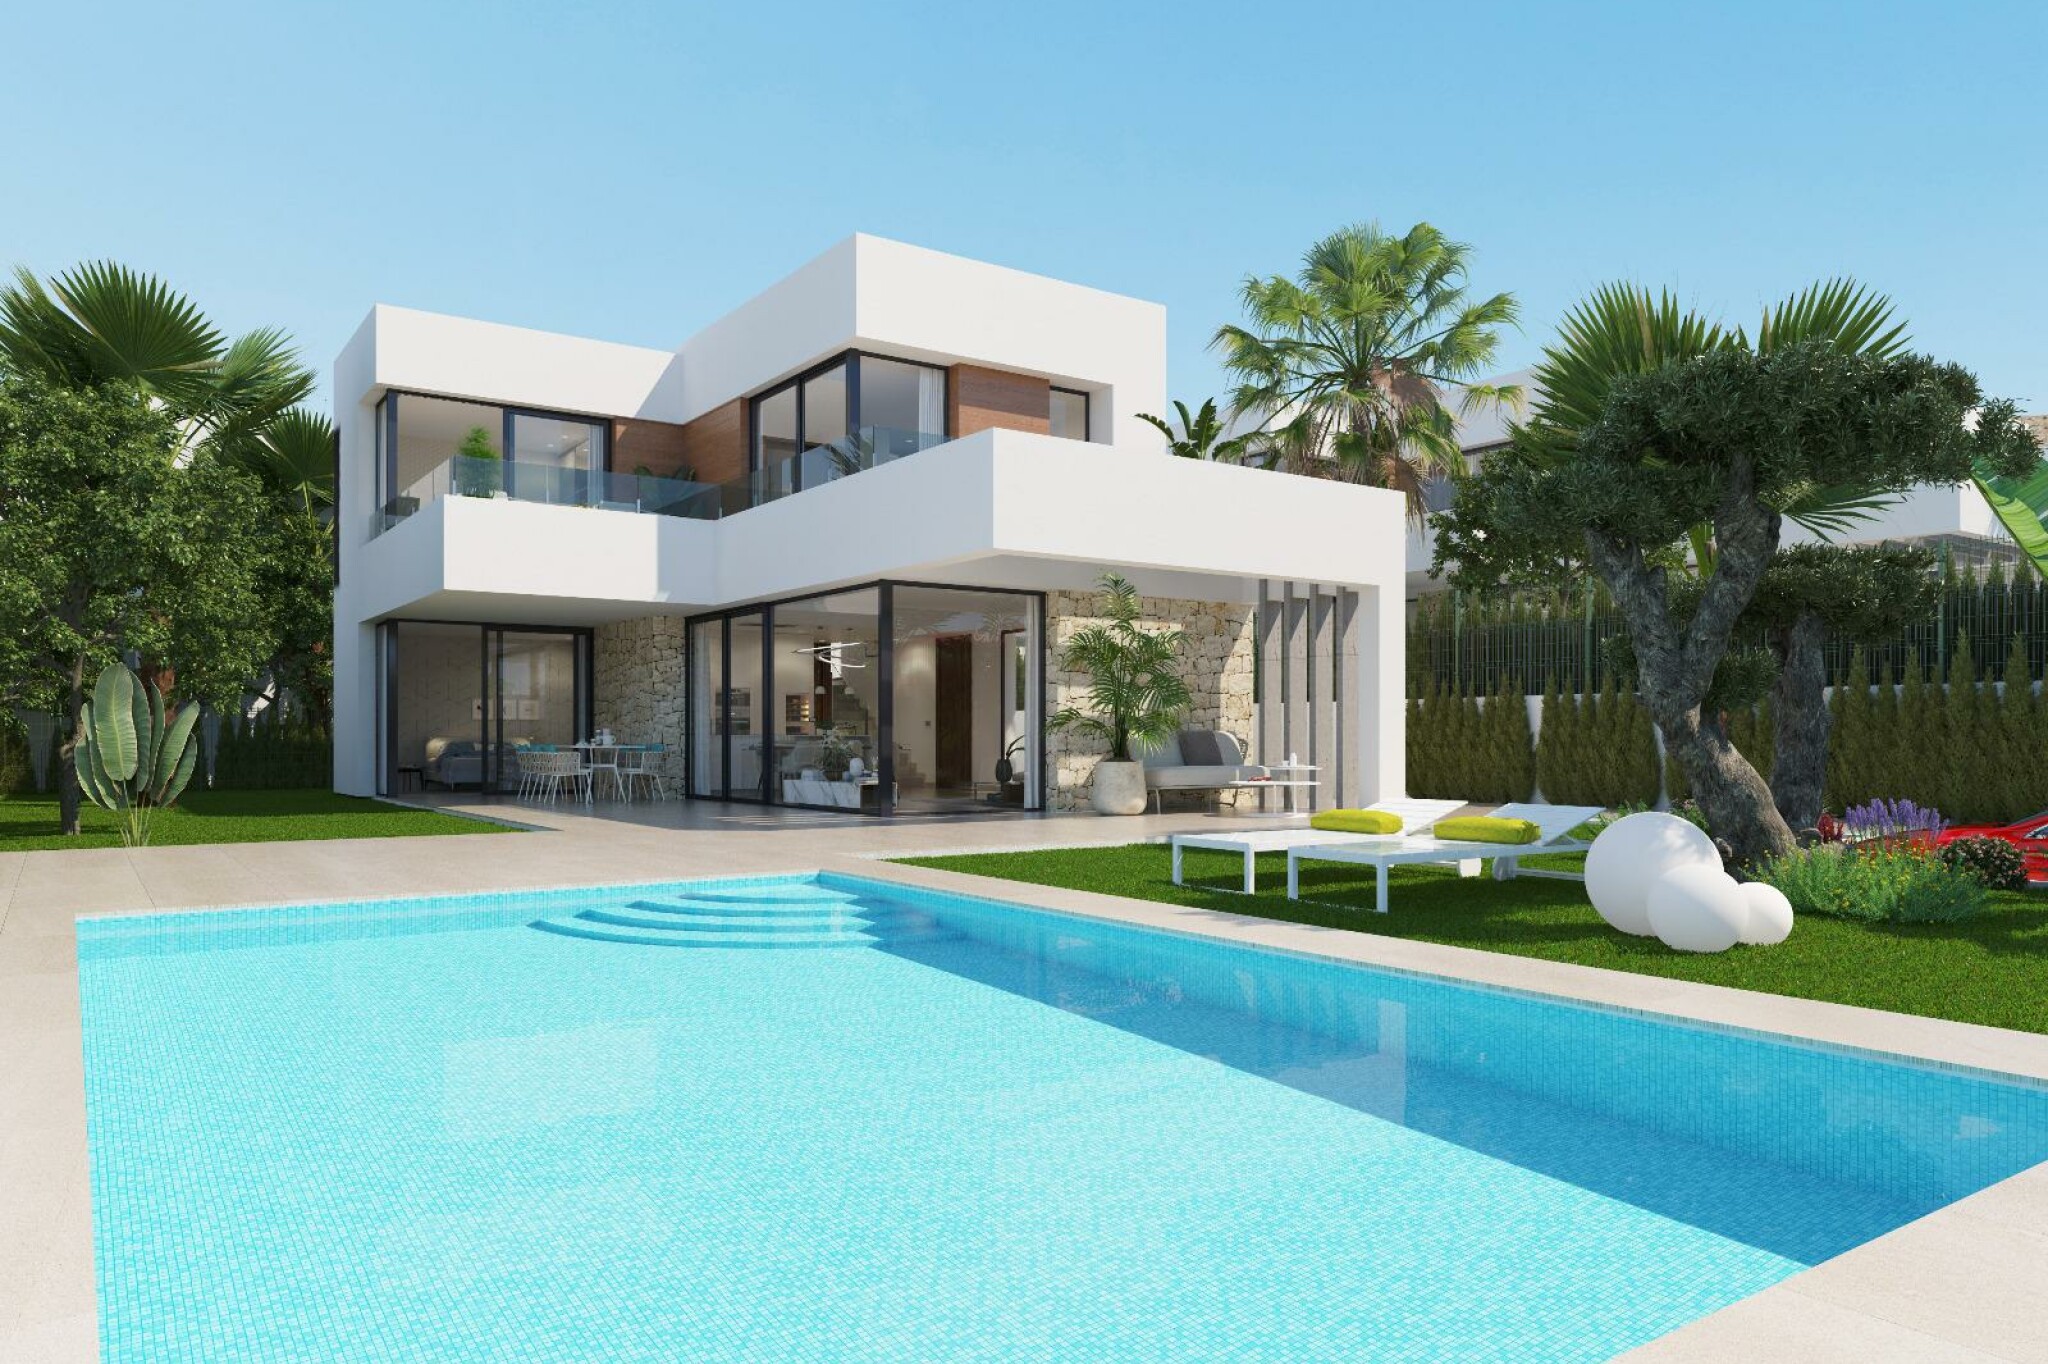 The purchase of villas on the Costa Blanca breaks records